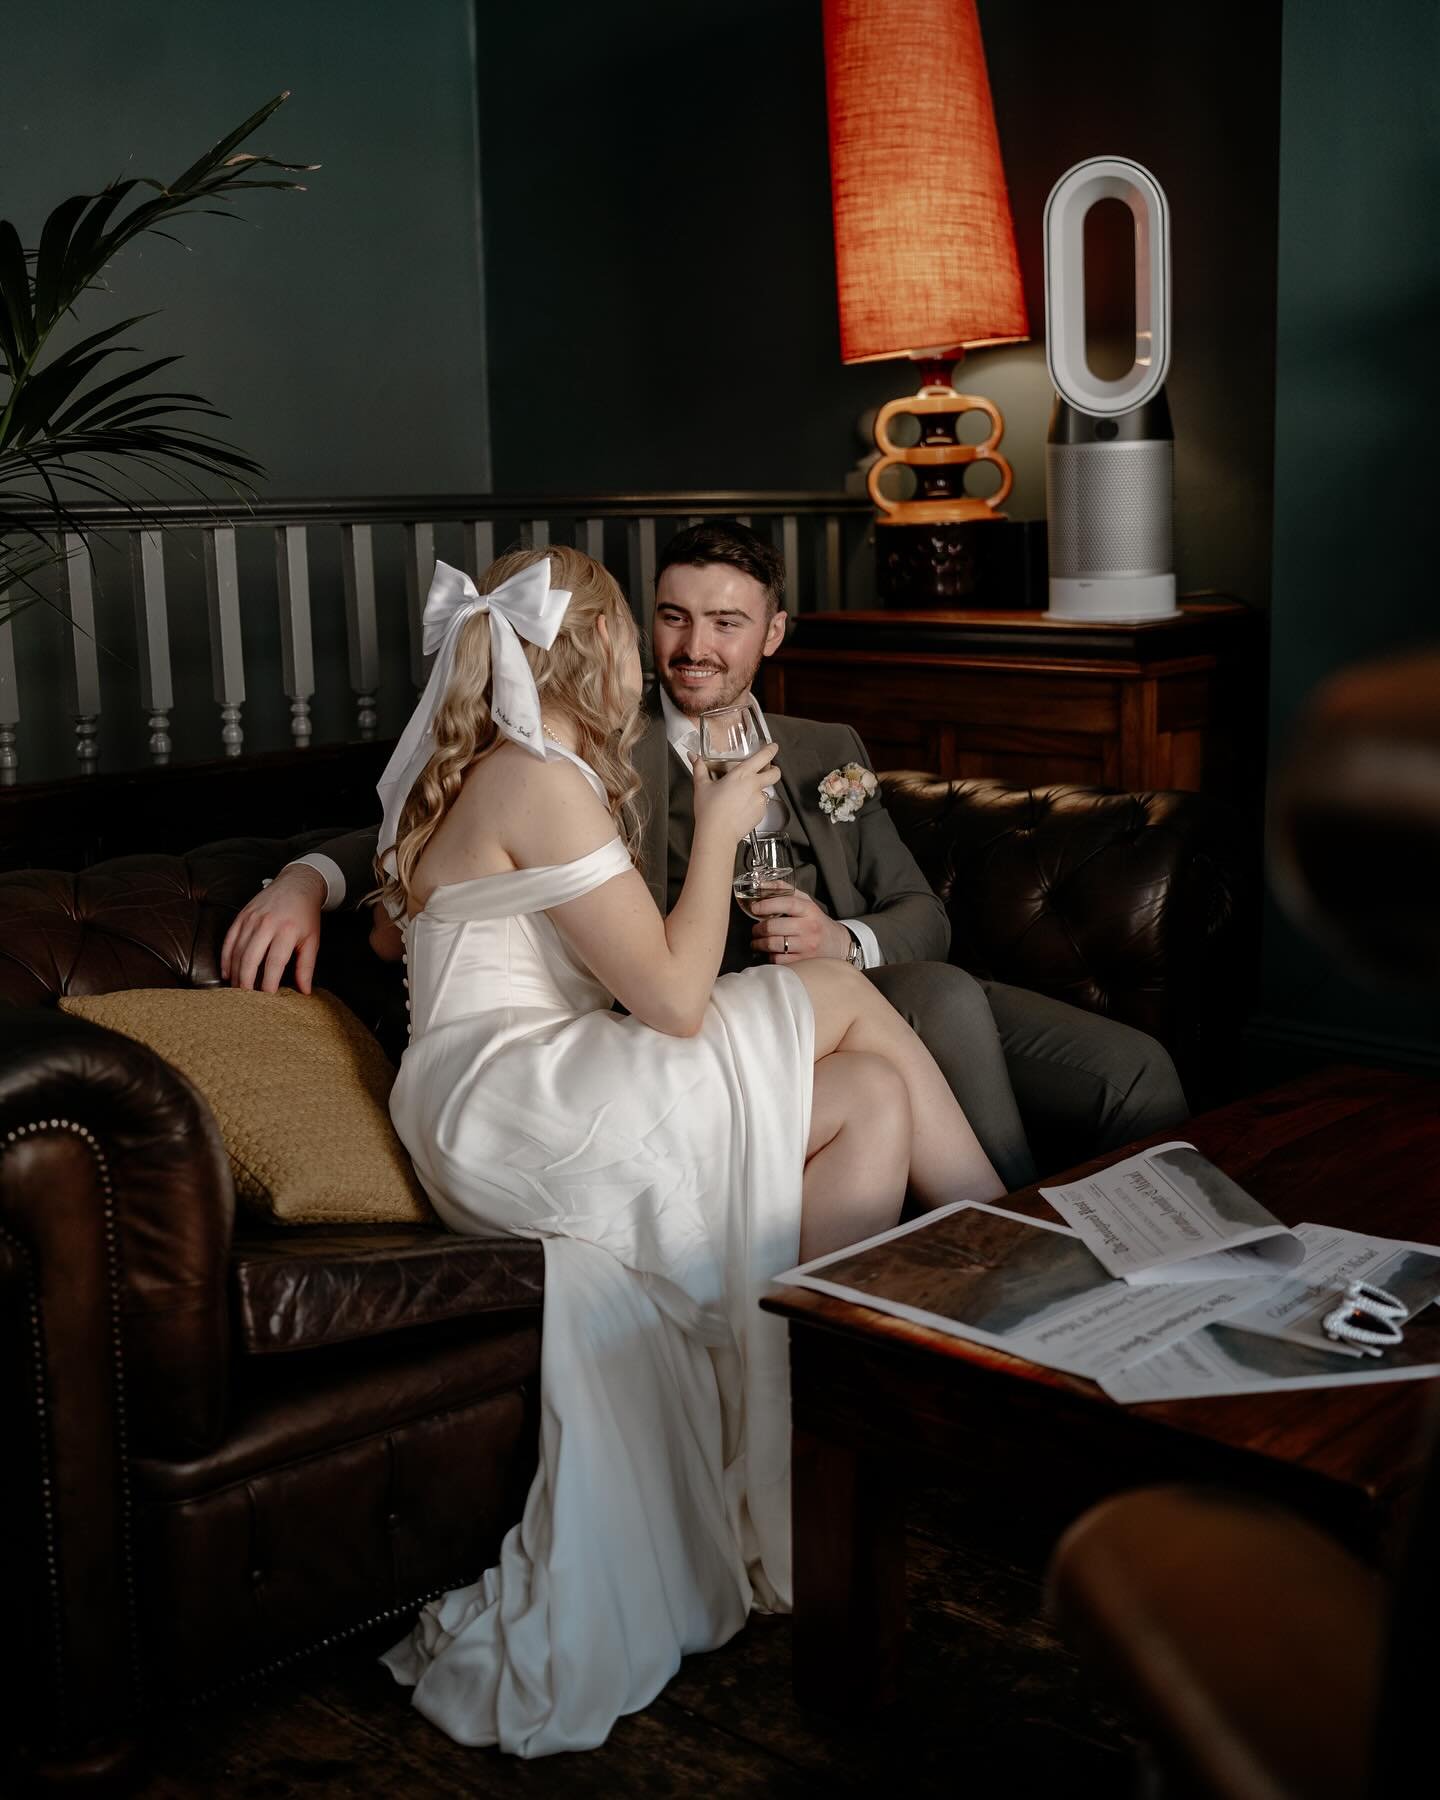 Back to where it all began for Jen &amp; Mike &hellip; 

These guys chose to get married in Norfolk as they met in Norwich and spent their first evening together at @wallowwine &hellip;  Of course when we popped into the city for the legal ceremony w